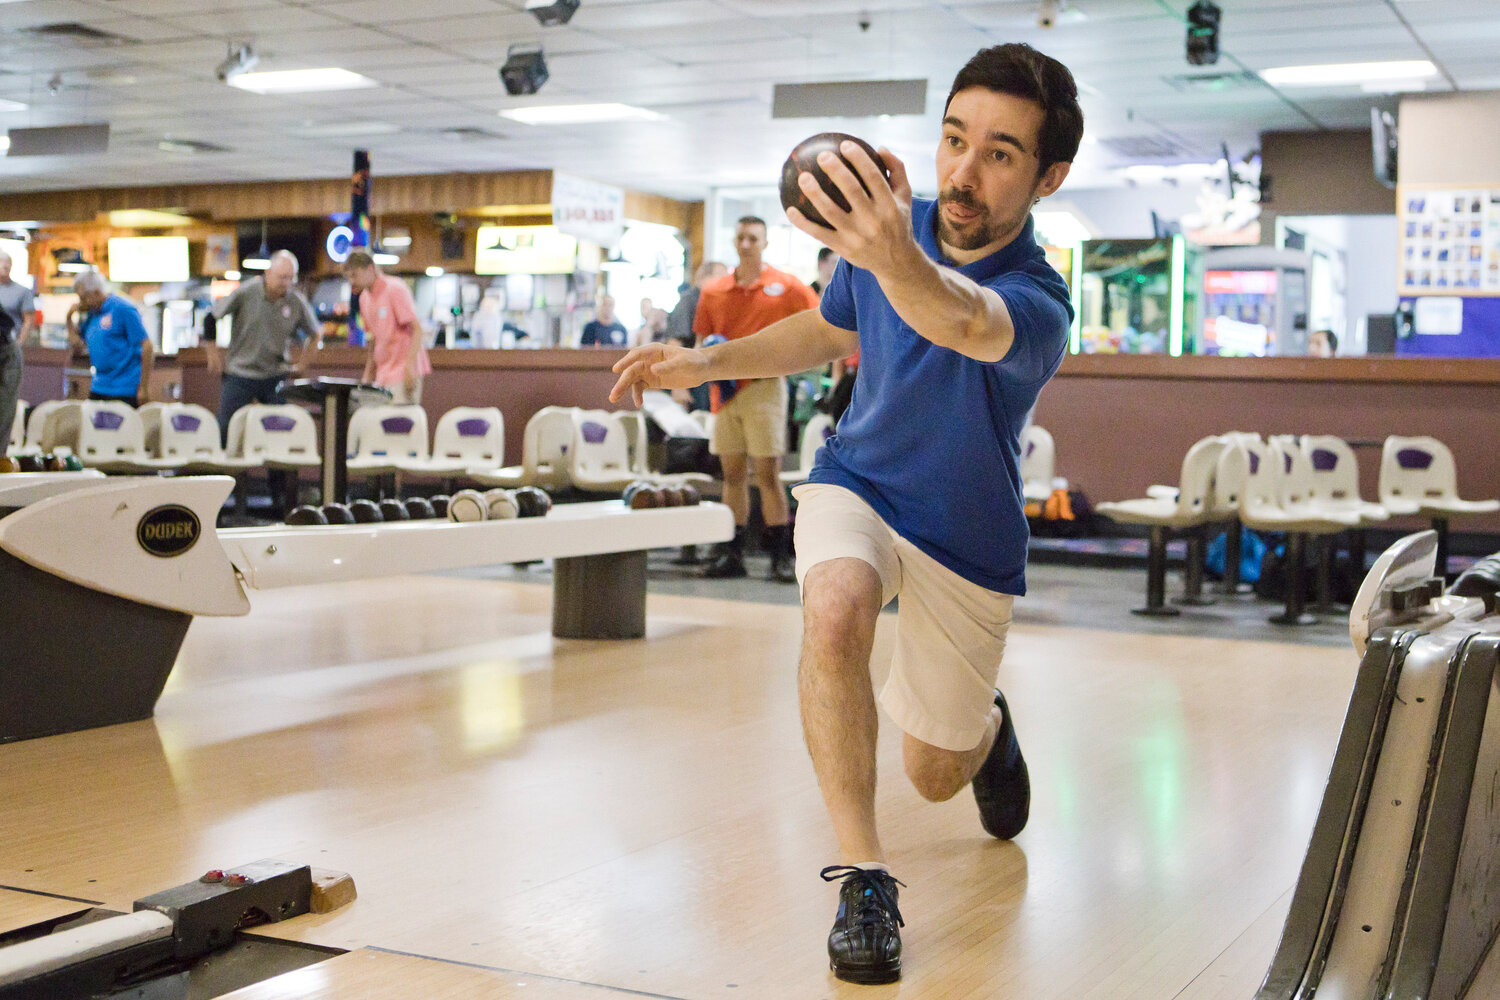 Barrington's Chris Brindamour competed in the recent Duckpin Professional Bowlers Association Tour stop at Dudek Lanes in Warren.